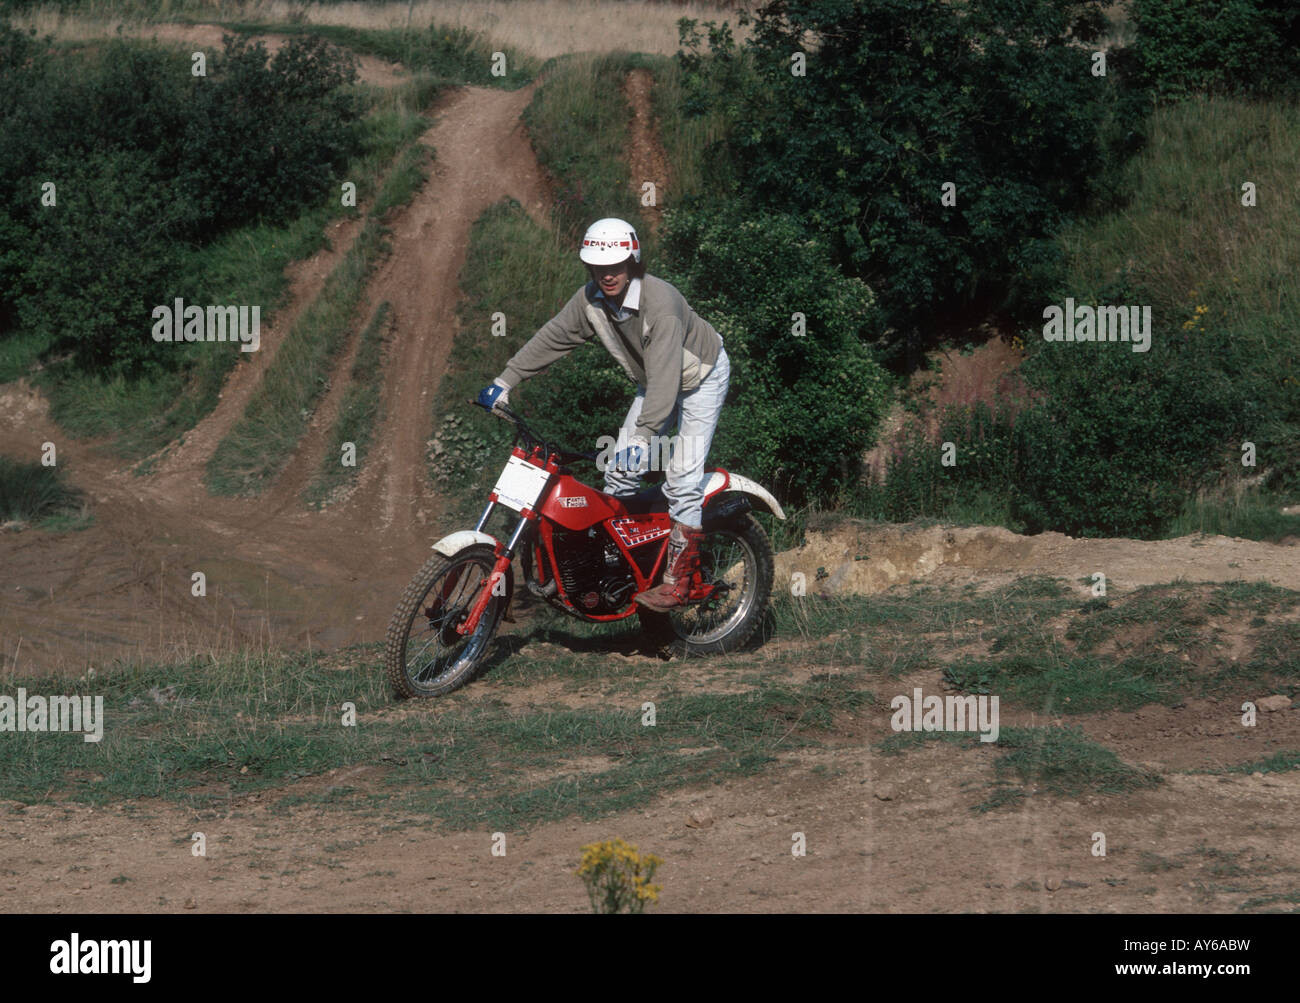 Young motorcyclist on scrambler trial bike on quarry site Cotswold countryside UK Stock Photo